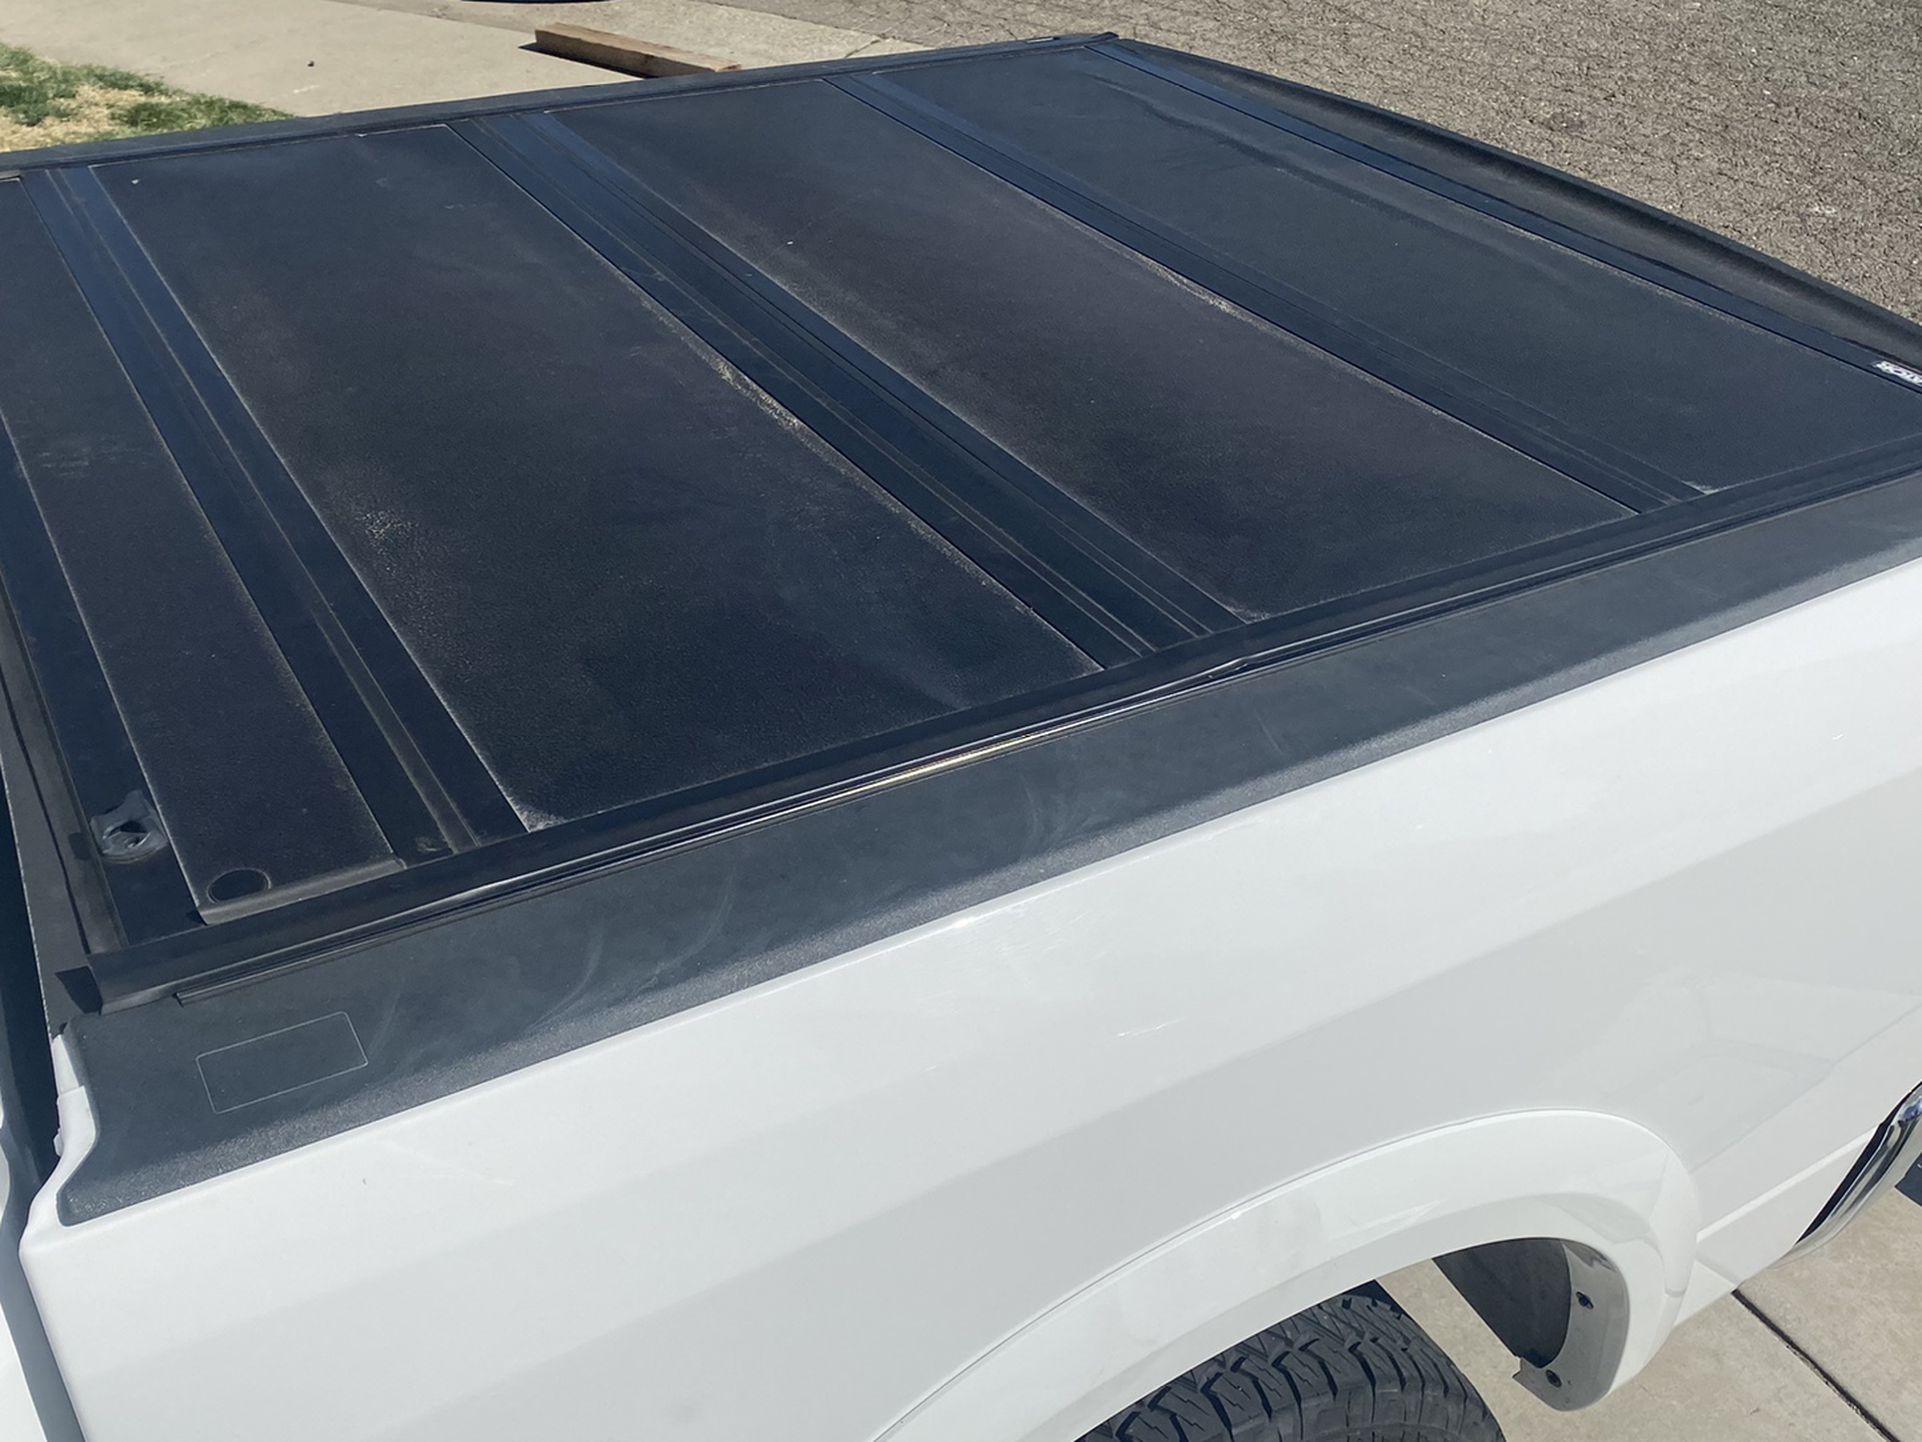 Ram 1500 Bed Cover